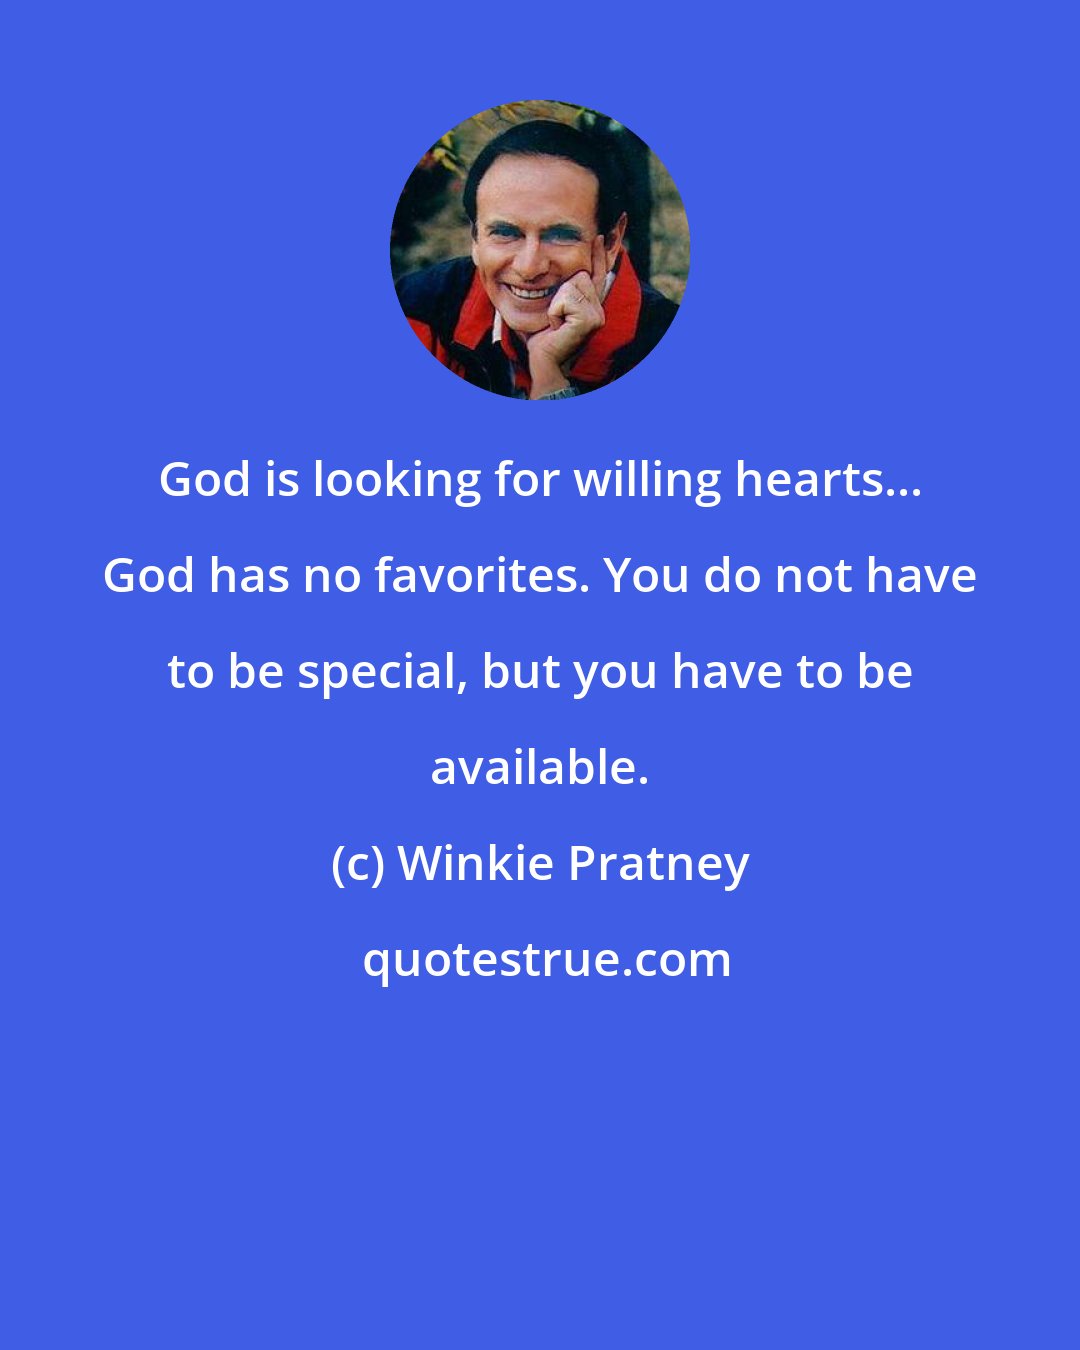 Winkie Pratney: God is looking for willing hearts... God has no favorites. You do not have to be special, but you have to be available.